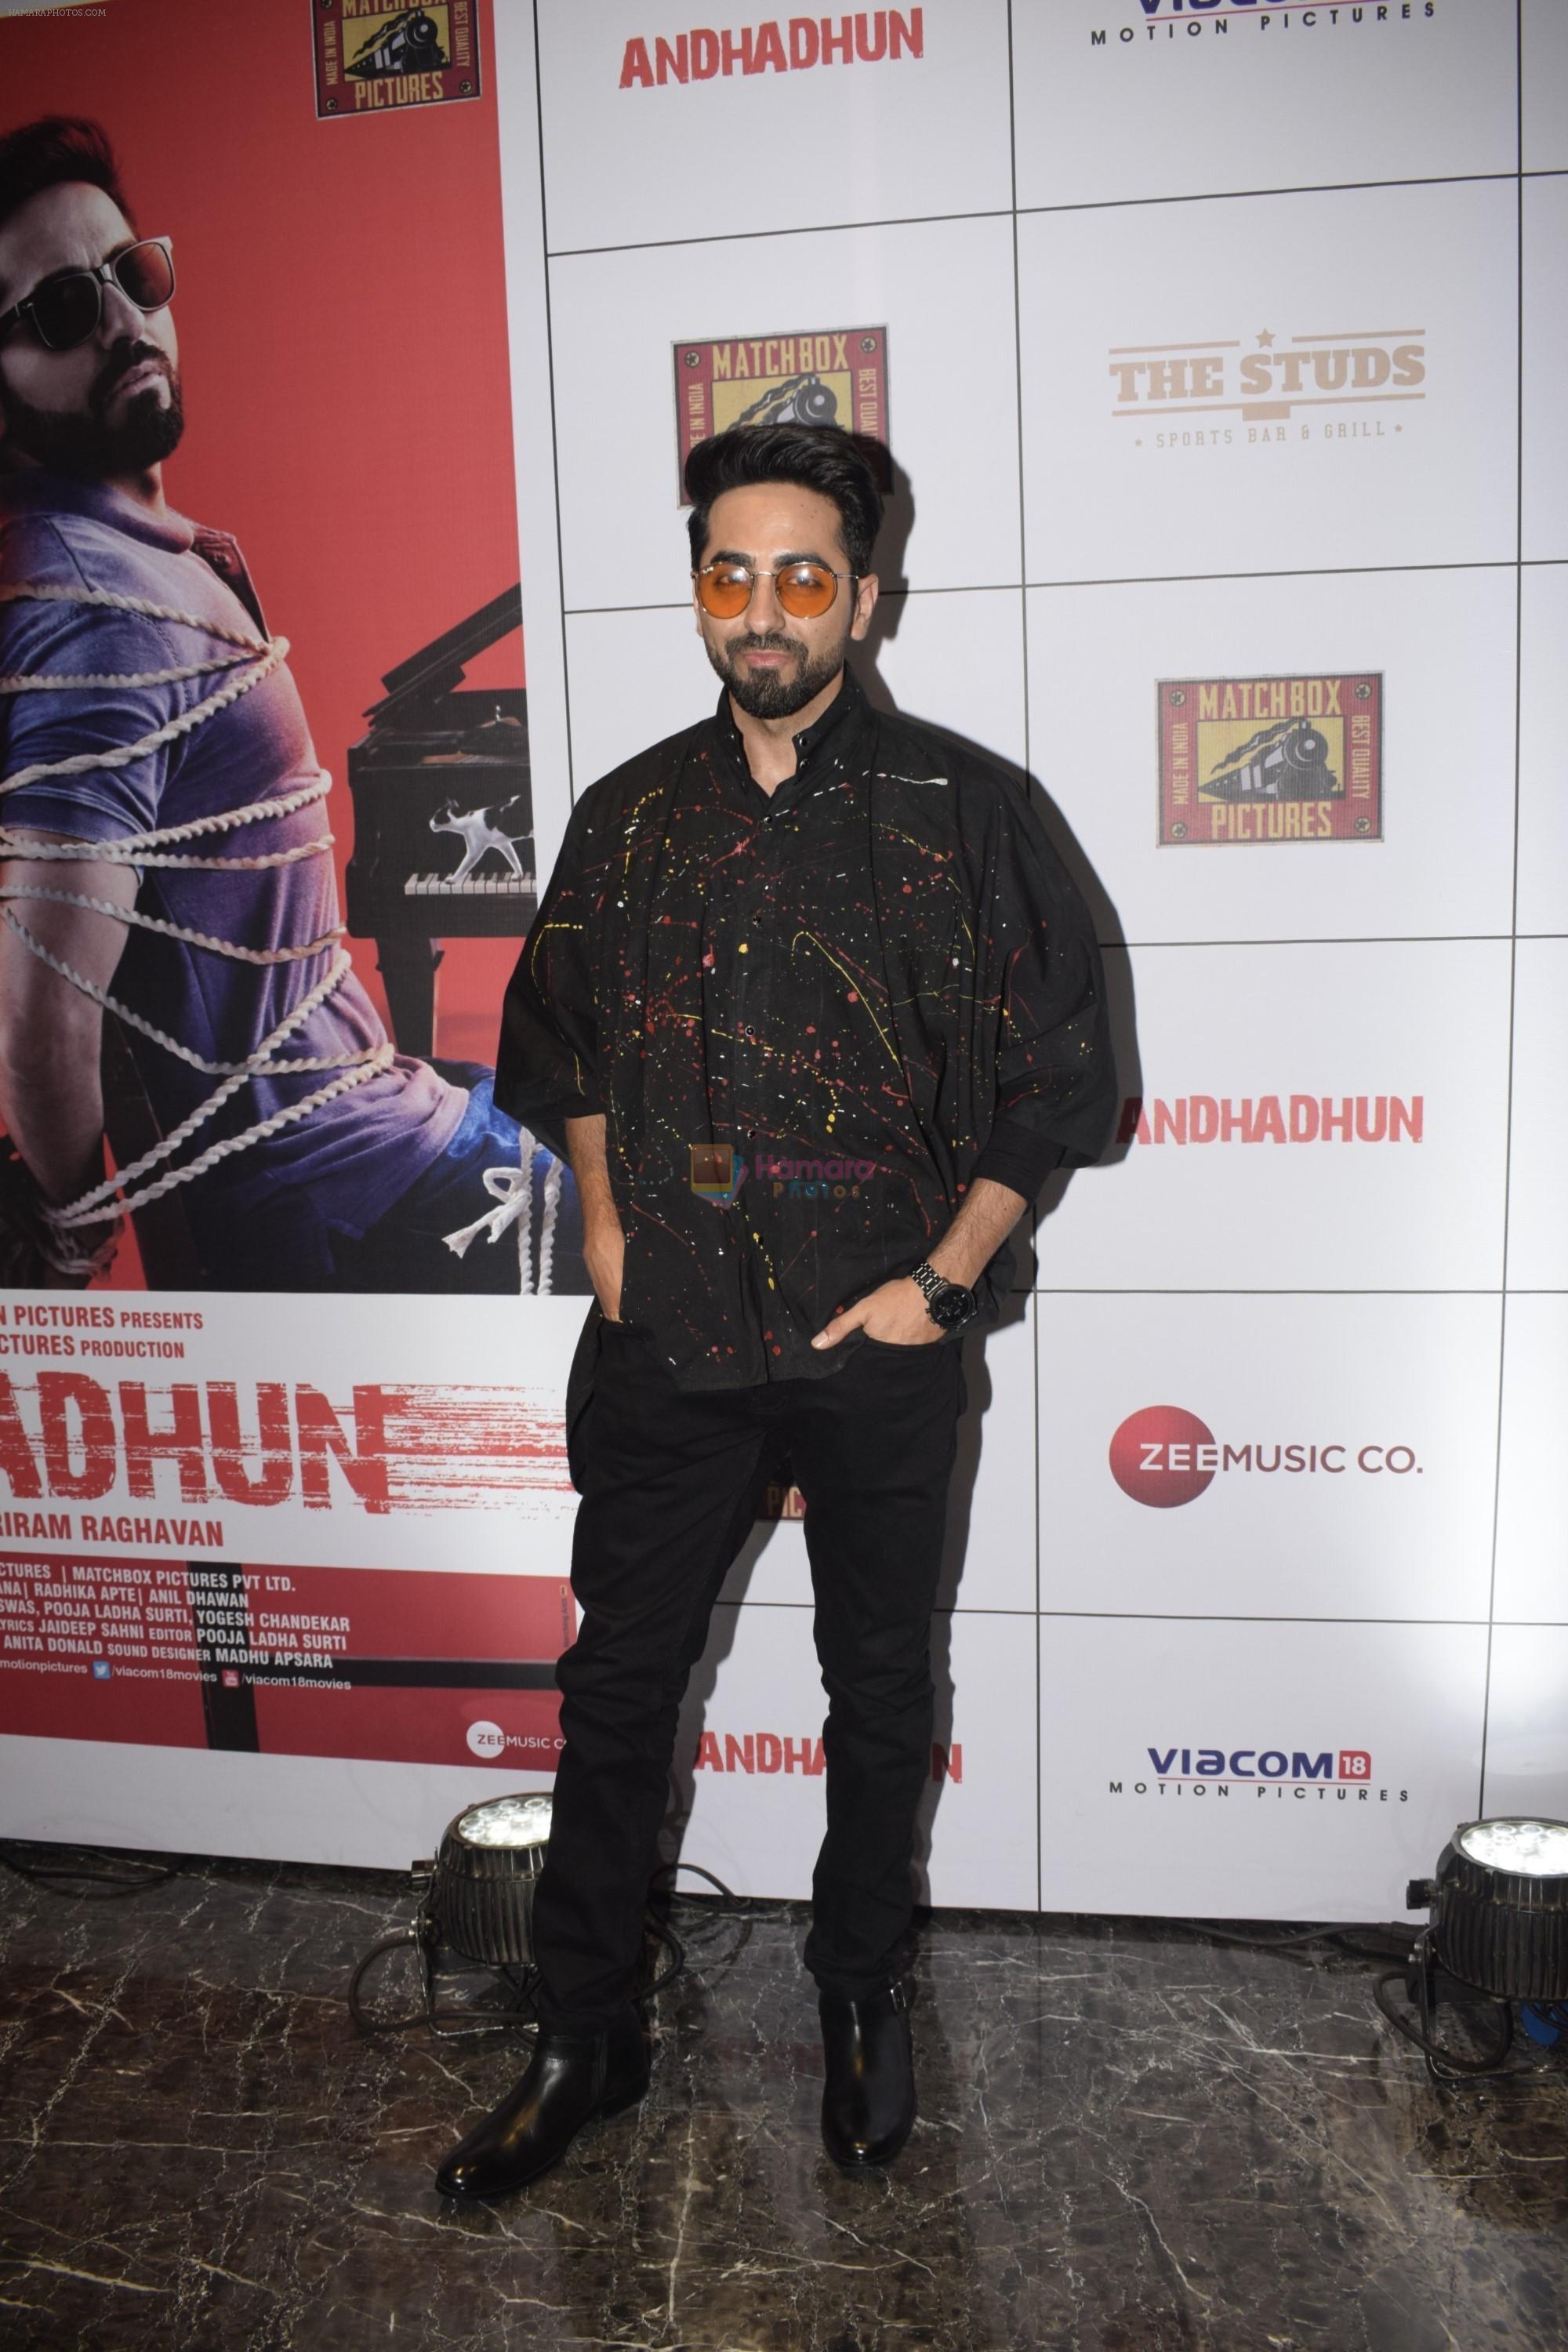 Ayushmann Khurrana at the Success Party of Film Andhadhun on 16th Oct 2018